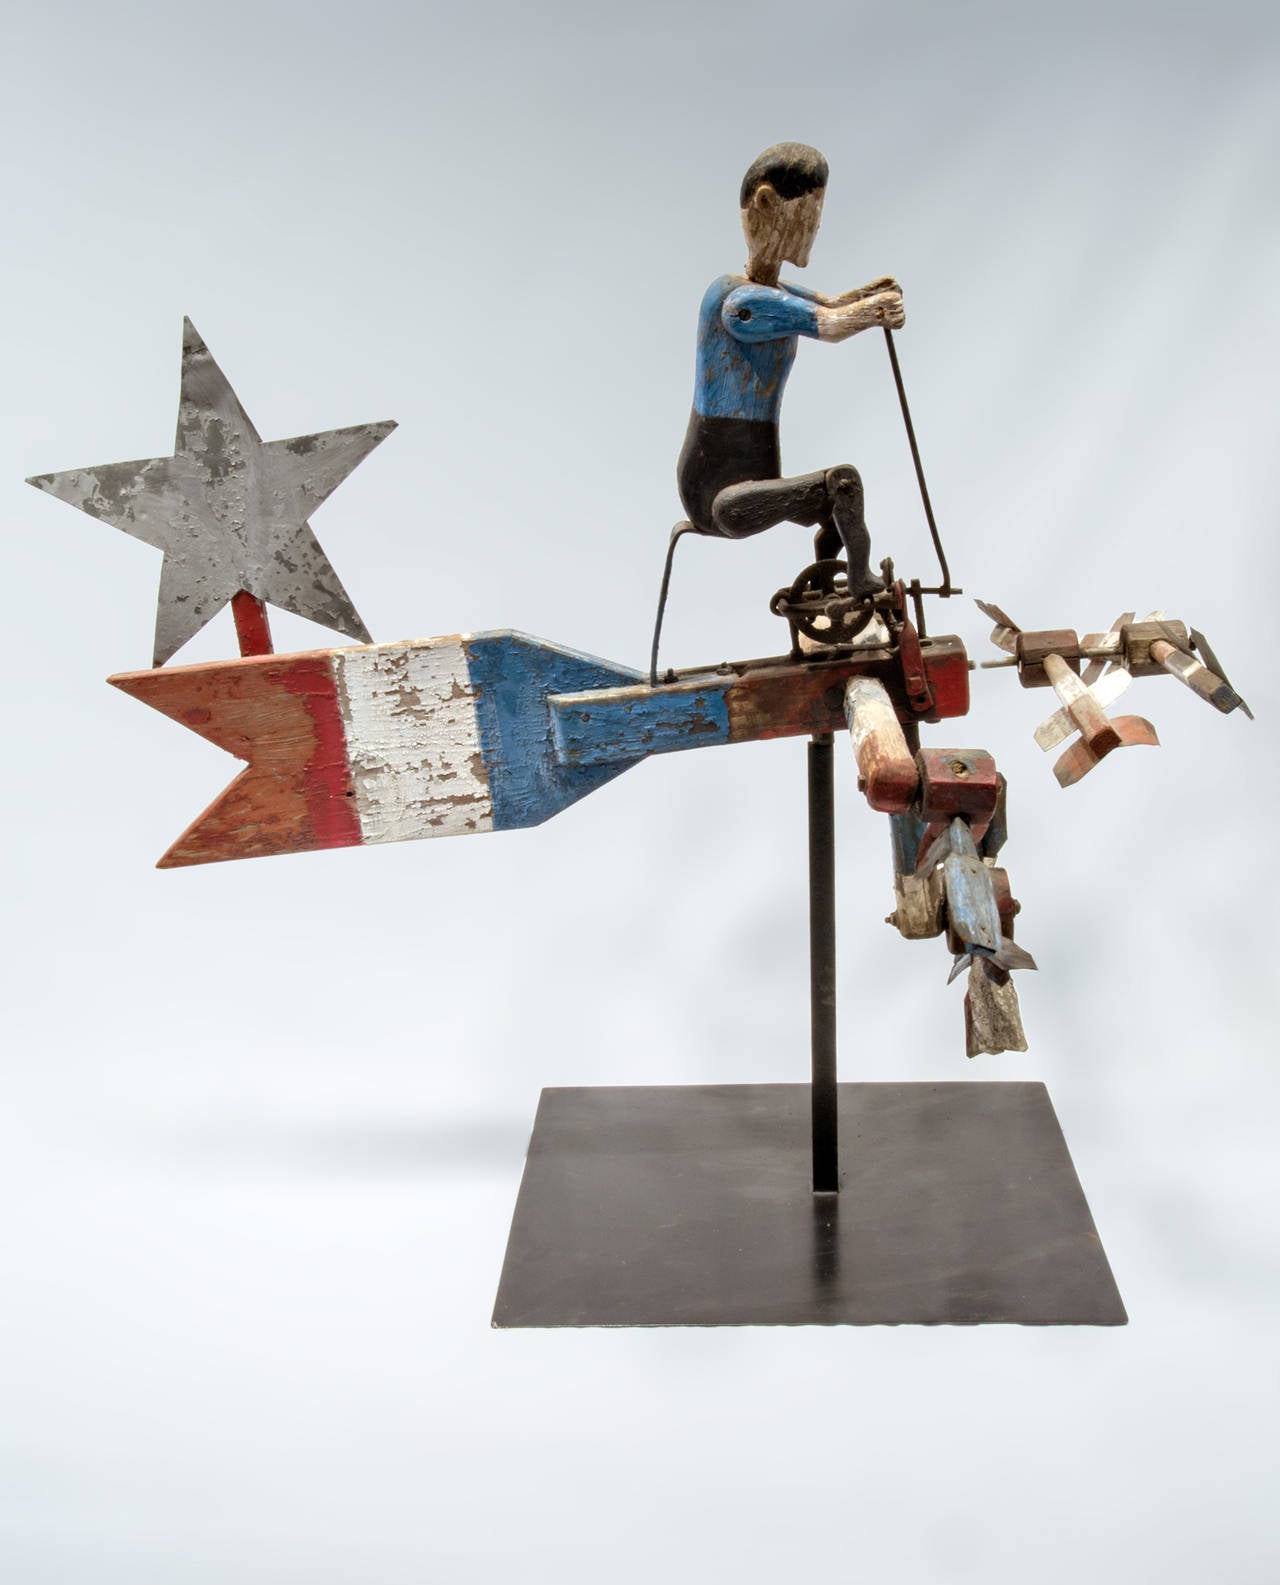 Carved pine whirligig of man on a bicycle, propeller driven and painted in patriotic colors with painted sheet metal star attached to arrow. The carved figure has articulated arms and legs and is seated on a metal stand. All original with minor